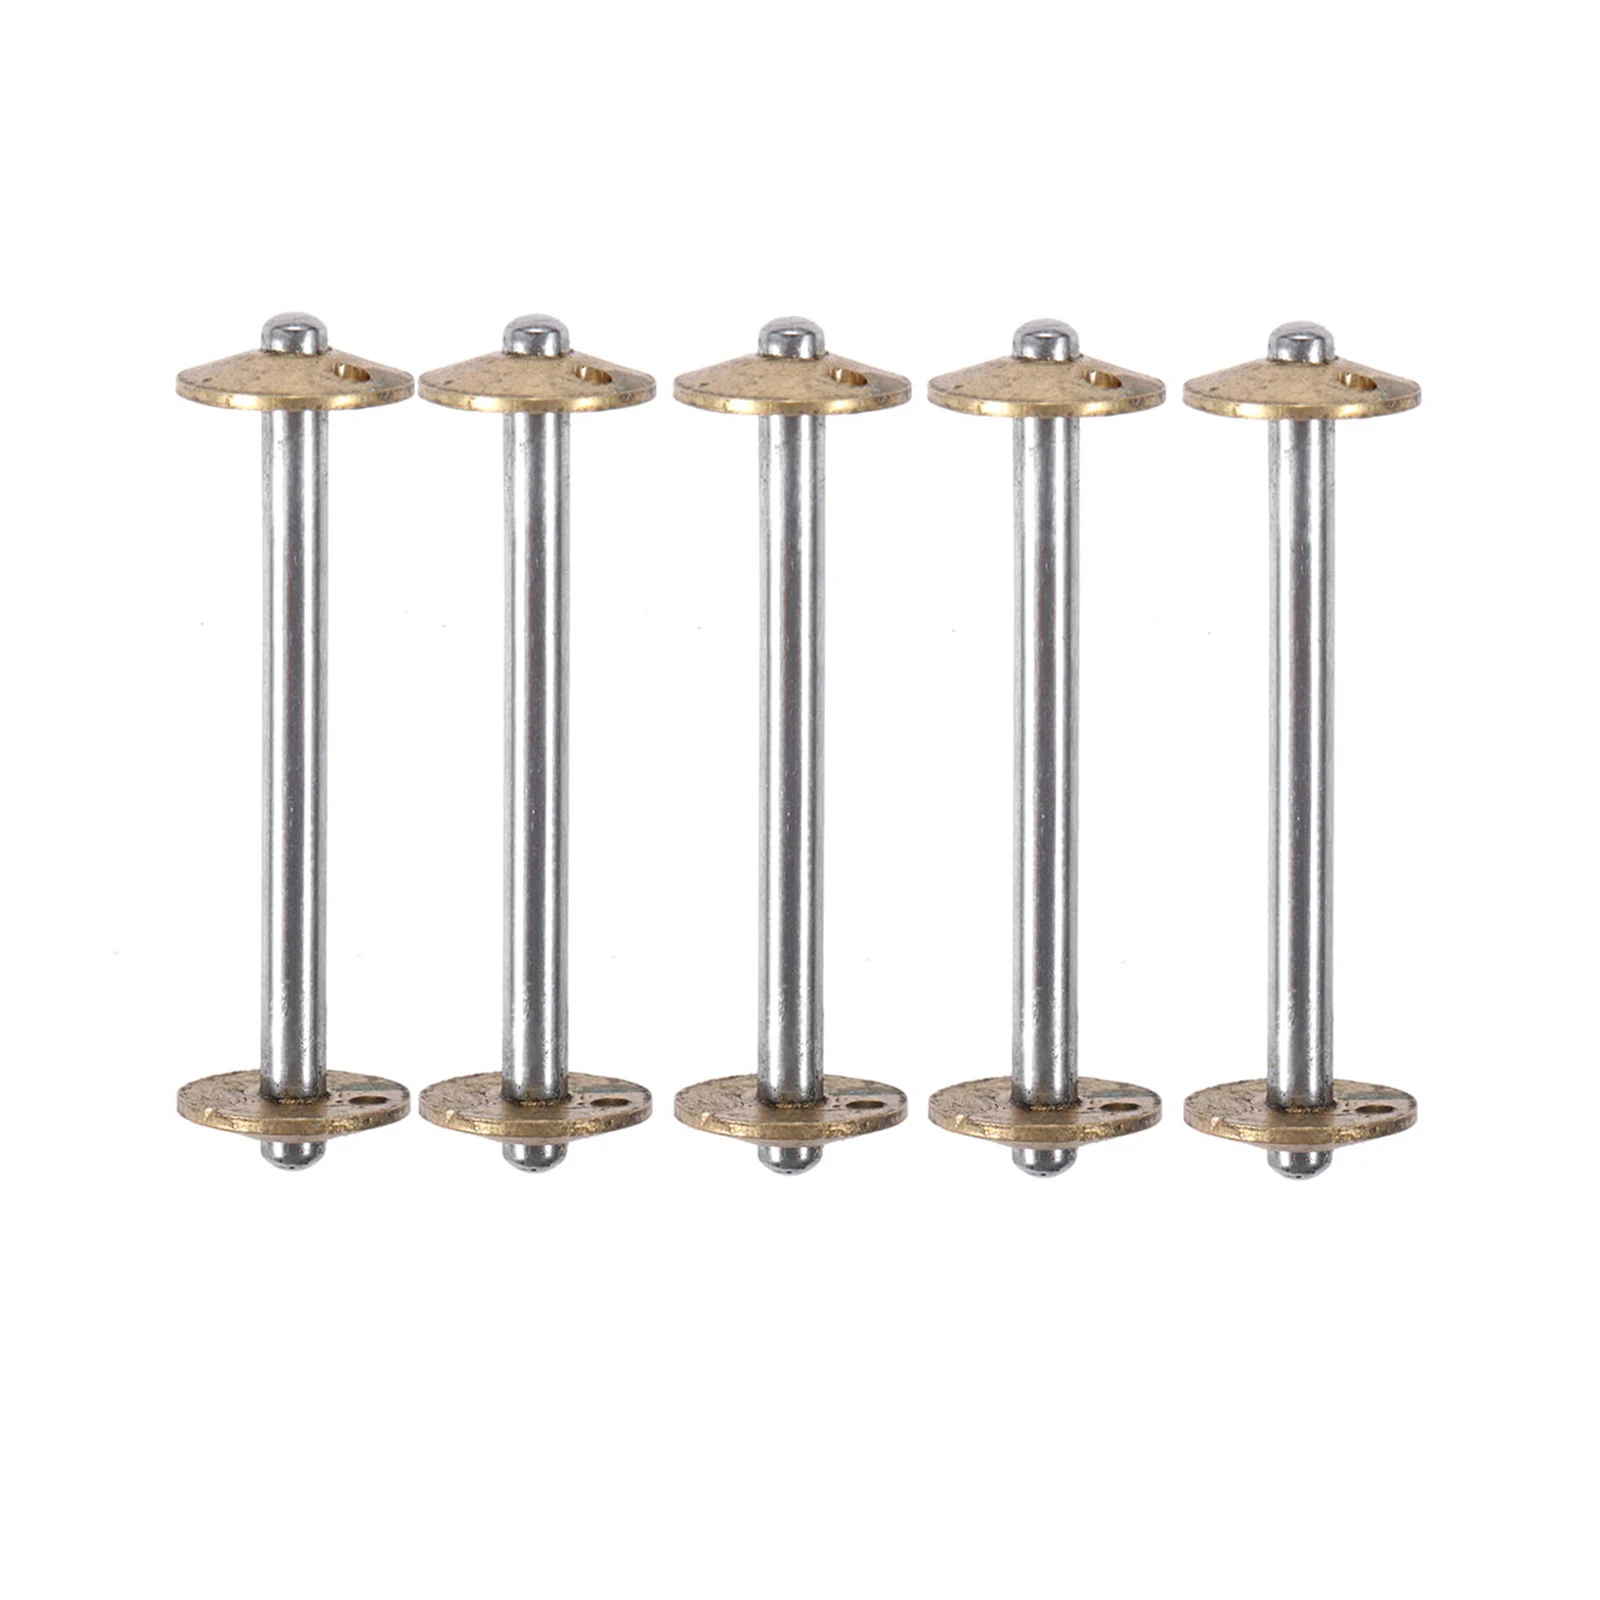 10/5/1Pcs Steel Household Old Style Sewing Machine Spare Parts Long Bobbins #8228 for Singer Class 27 28 127 127-12 128, 30*9mm images - 6